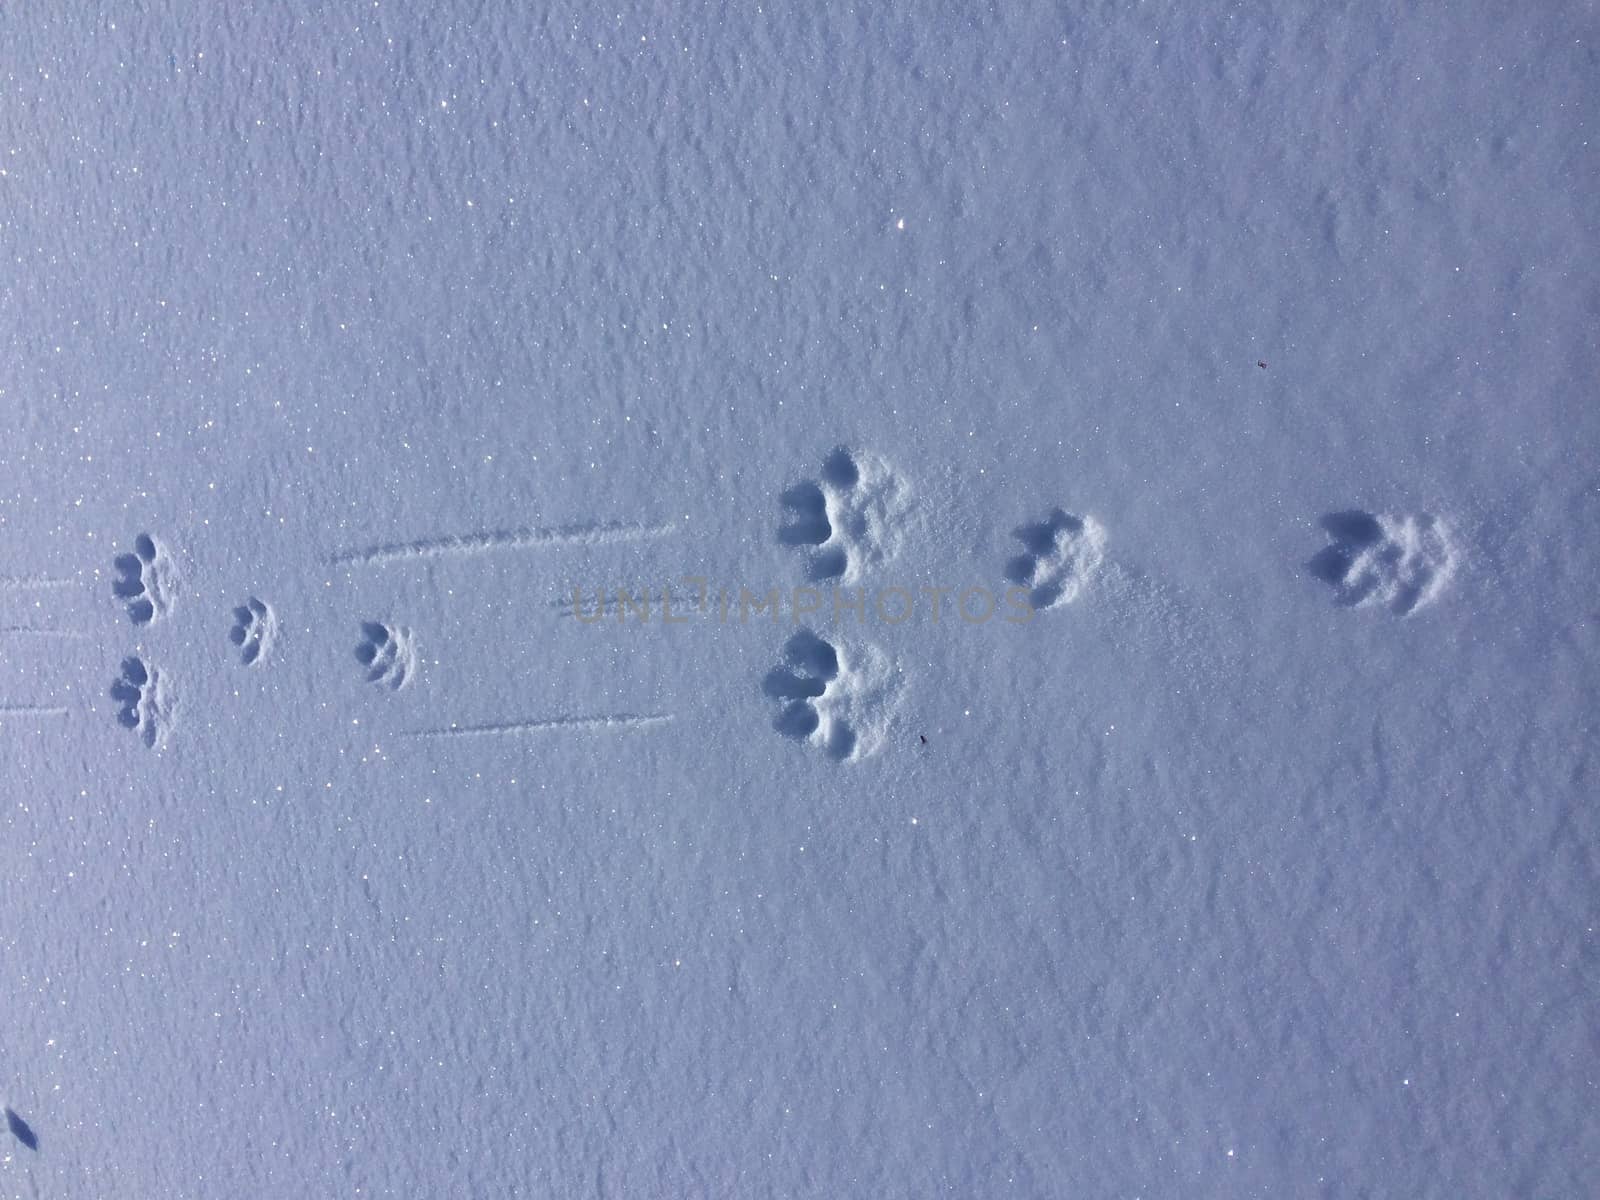 Hare tracks in snow by C.Sekkingstad